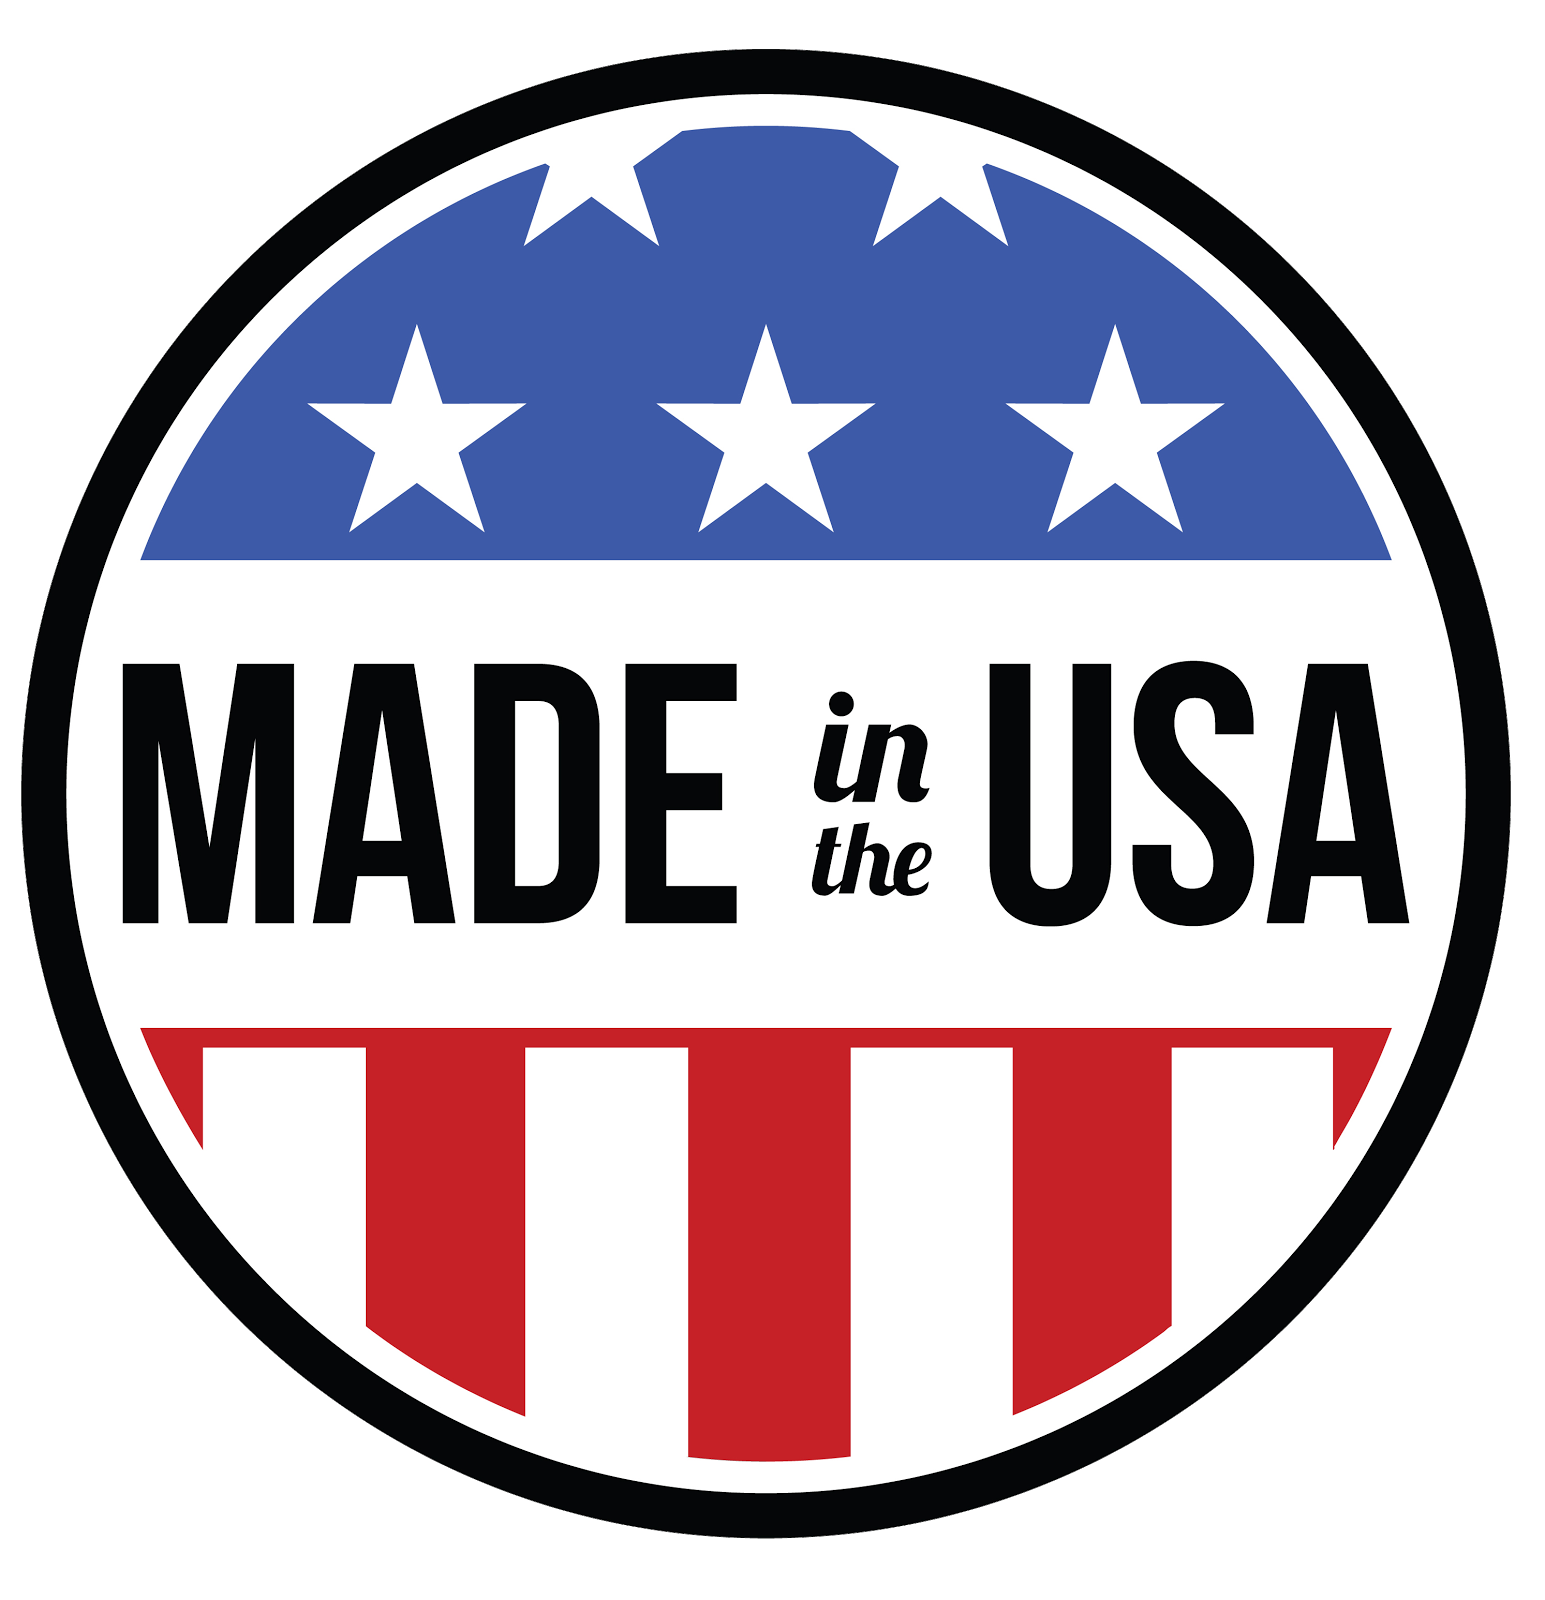 SnS is Made in the United States